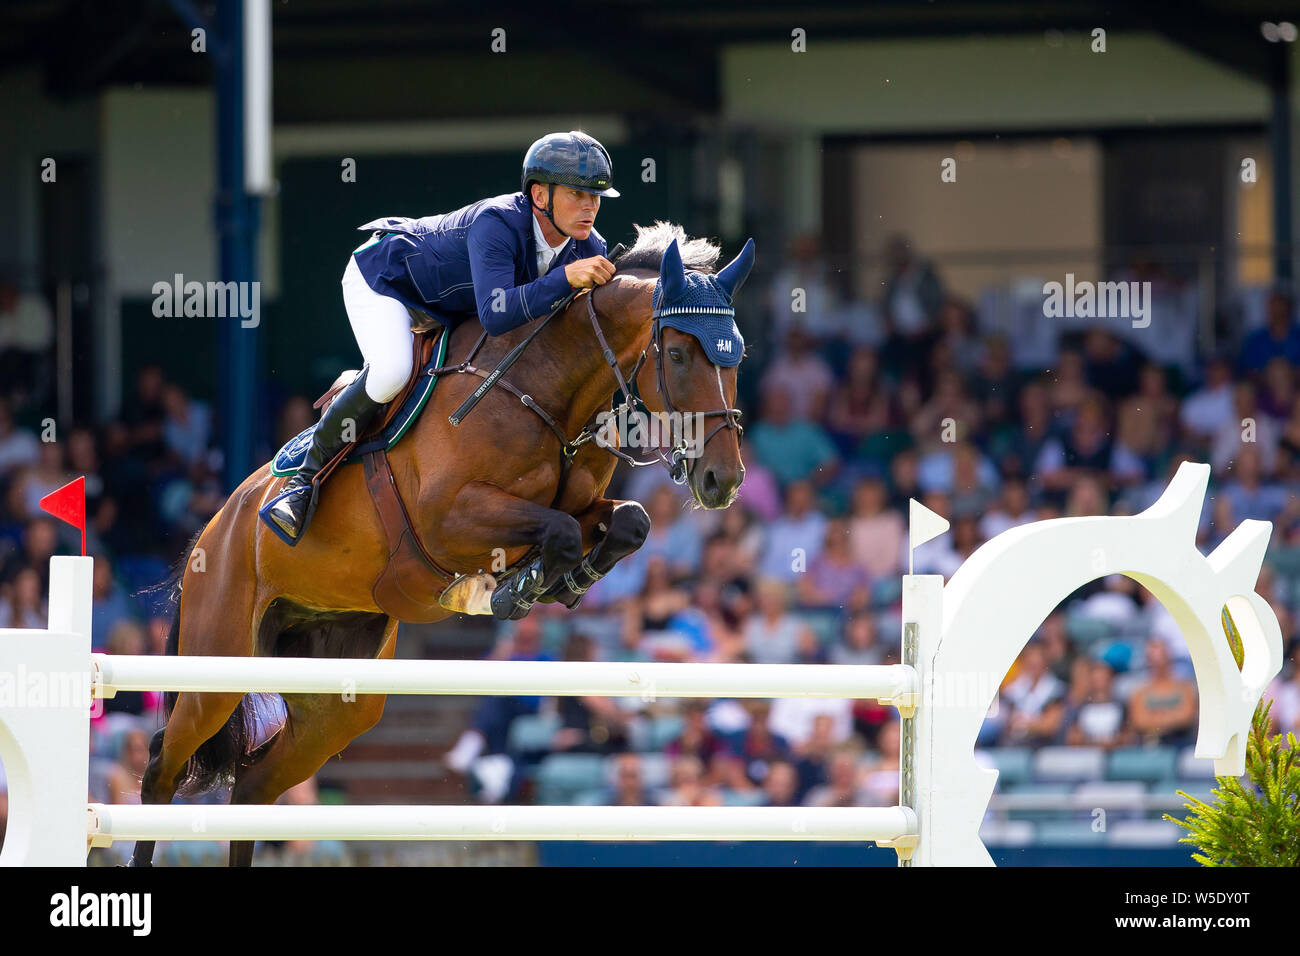 Hickstead, West Sussex, UK. 28th July 2019.  2nd place Peder Fredricson (SWE) riding Zacremento. The Longines BHS King George V Gold Cup at the Royal International Horse Show. Credit: Sport In Pictures/Alamy Live News Stock Photo